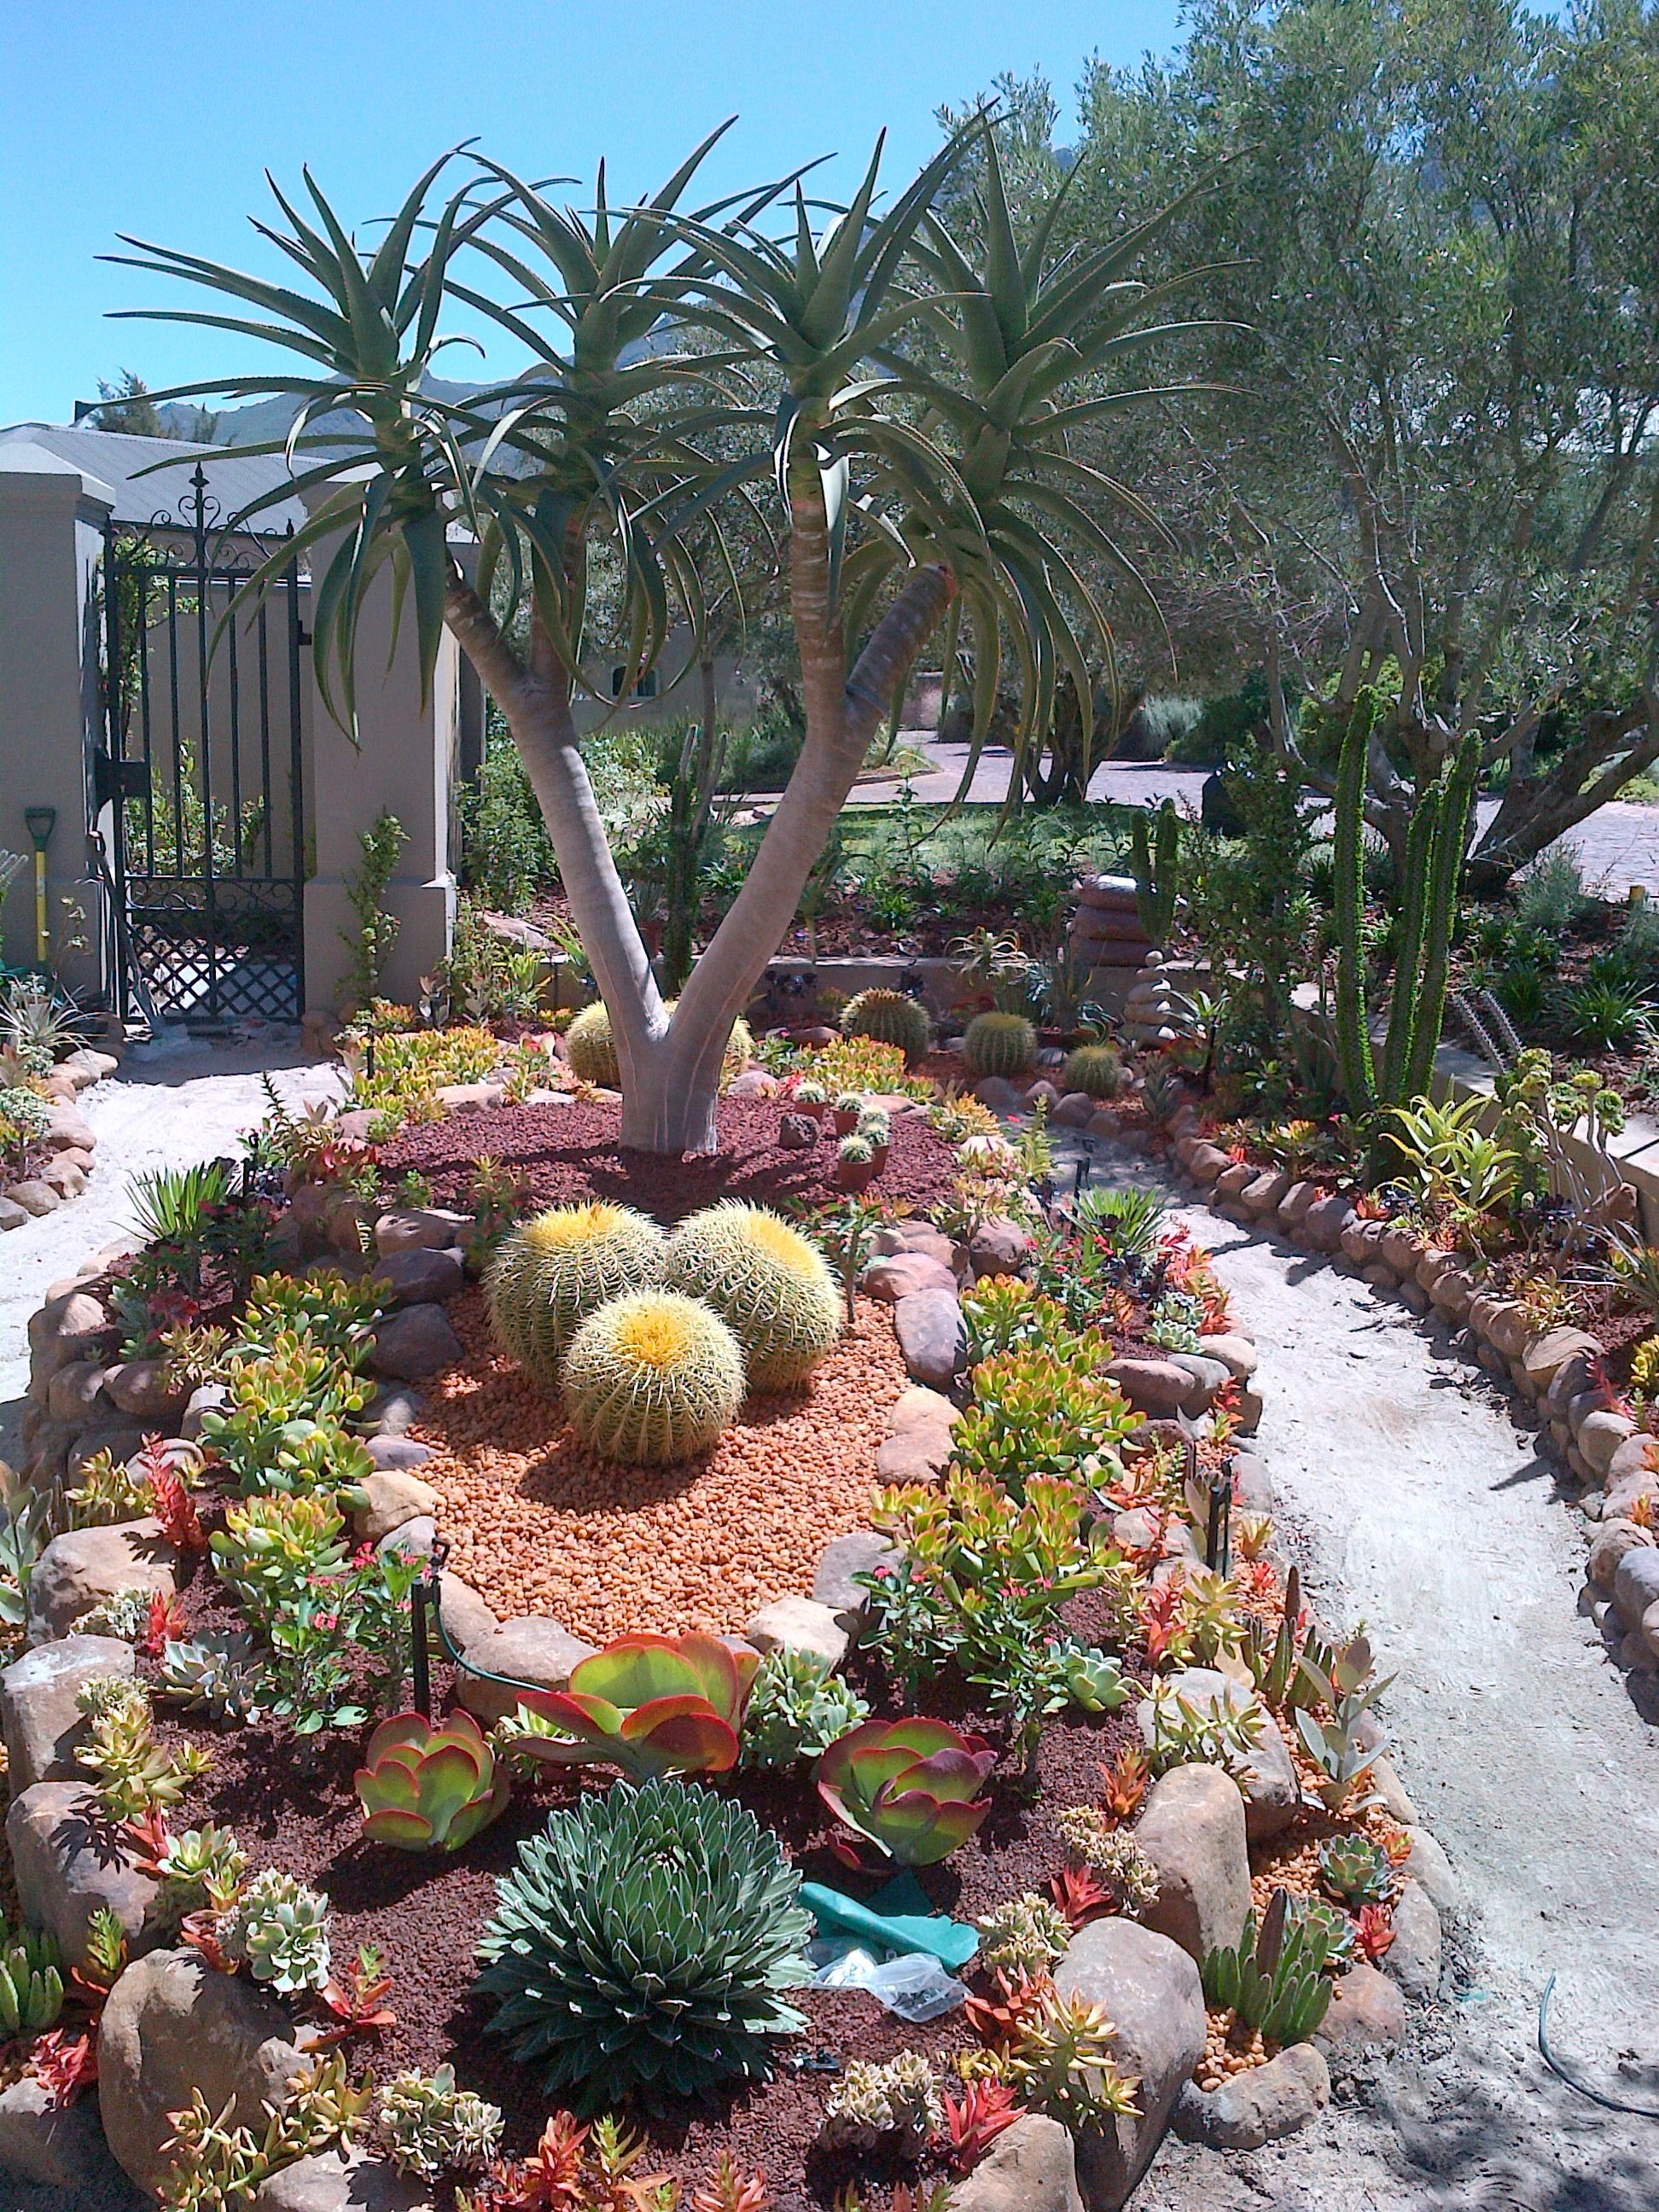 Maybe I could have barrel cactus if I put them in a raised garden so the dog wouldn't go near them. -   23 tropical rock garden
 ideas